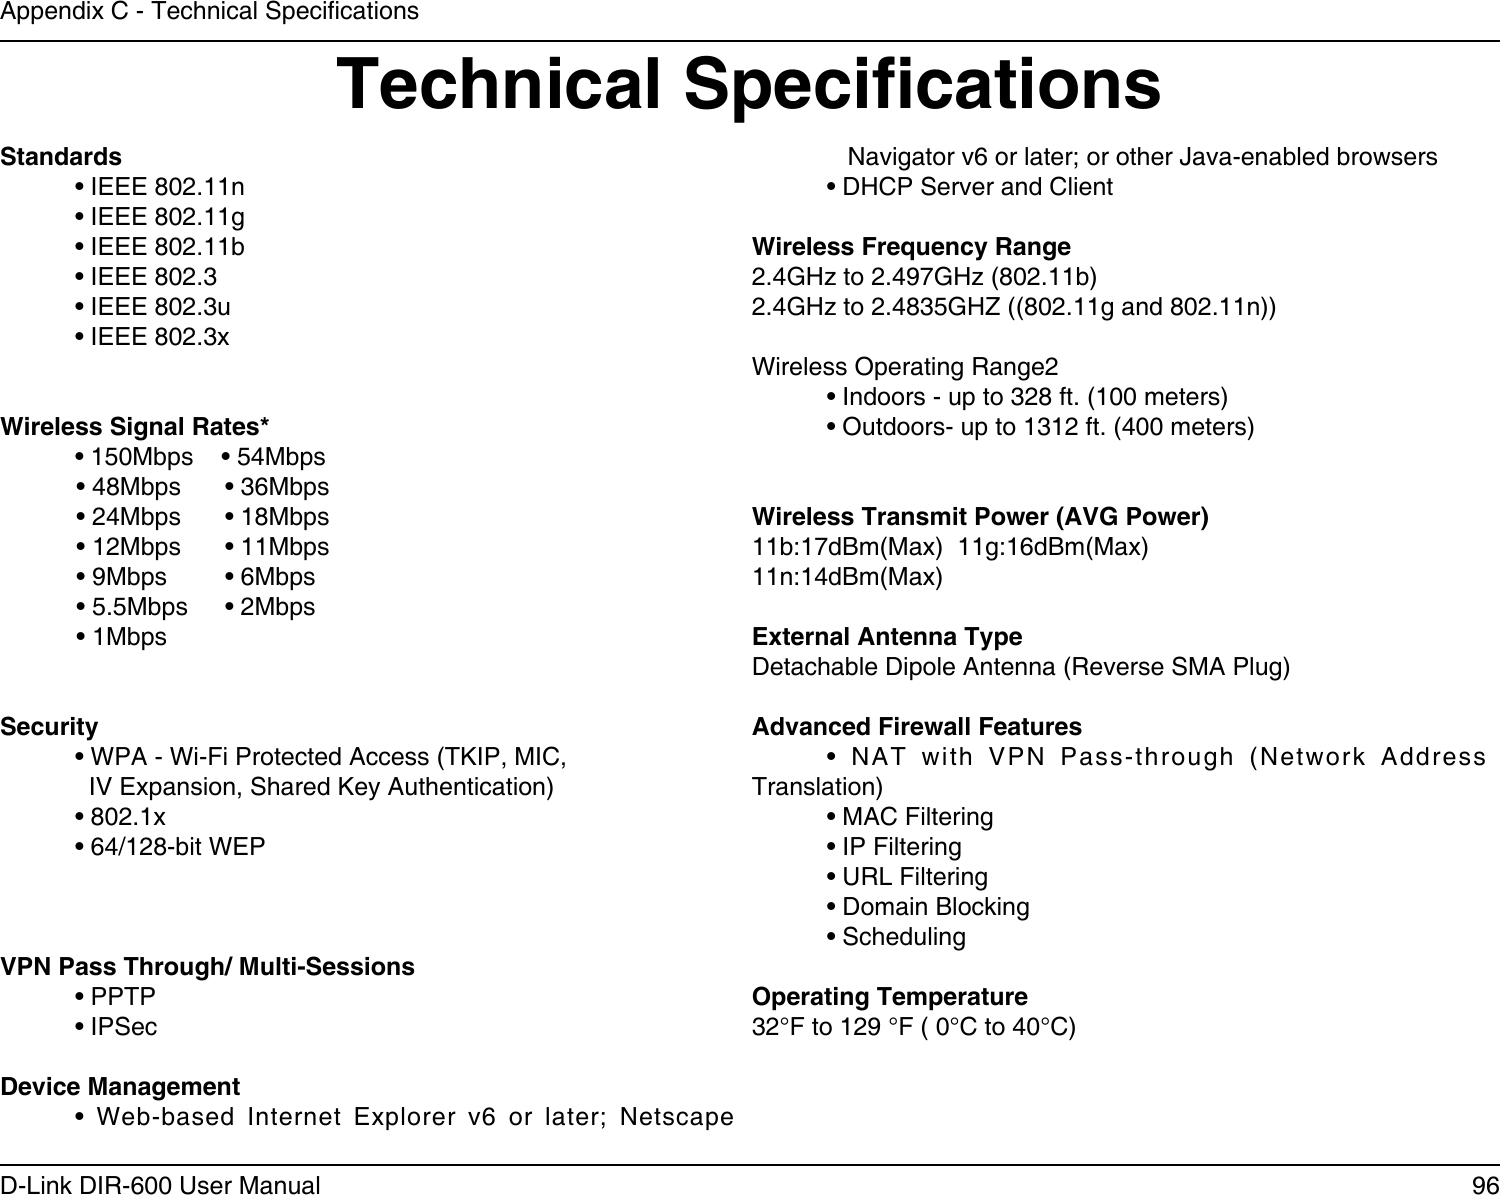 96D-Link DIR-600 User ManualAppendix C - Technical SpecicationsTechnical SpecicationsStandards  • IEEE 802.11n   • IEEE 802.11g  • IEEE 802.11b  • IEEE 802.3  • IEEE 802.3u  • IEEE 802.3x Wireless Signal Rates*  • 150Mbps    • 54Mbps             • 48Mbps  • 36Mbps            • 24Mbps  • 18Mbps            • 12Mbps  • 11Mbps             • 9Mbps  • 6Mbps             • 5.5Mbps  • 2Mbps             • 1MbpsSecurity  • WPA - Wi-Fi Protected Access (TKIP, MIC,    IV Expansion, Shared Key Authentication)  • 802.1x  • 64/128-bit WEPVPN Pass Through/ Multi-Sessions  • PPTP   • IPSecDevice Management  •  Web-based  Internet  Explorer  v6  or  later;  Netscape       Navigator v6 or later; or other Java-enabled browsers  • DHCP Server and ClientWireless Frequency Range2.4GHz to 2.497GHz (802.11b)2.4GHz to 2.4835GHZ ((802.11g and 802.11n))Wireless Operating Range2  • Indoors - up to 328 ft. (100 meters)  • Outdoors- up to 1312 ft. (400 meters)Wireless Transmit Power (AVG Power)11b:17dBm(Max)  11g:16dBm(Max)  11n:14dBm(Max)External Antenna TypeDetachable Dipole Antenna (Reverse SMA Plug)Advanced Firewall Features  •  NAT  with  VPN  Pass-through  (Network  Address Translation)  • MAC Filtering  • IP Filtering  • URL Filtering  • Domain Blocking  • SchedulingOperating Temperature32°F to 129 °F ( 0°C to 40°C)